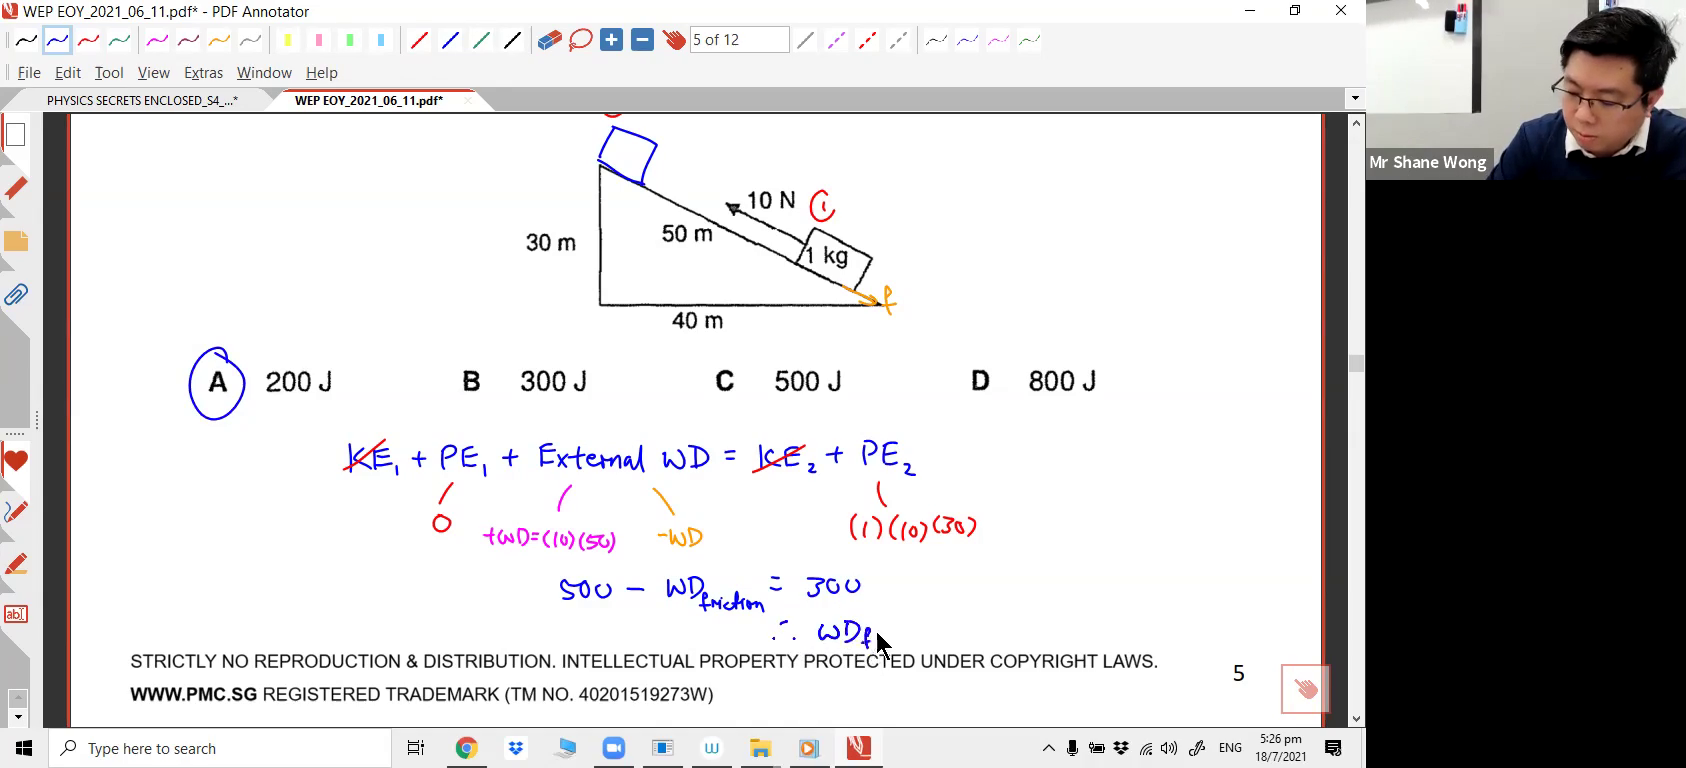 [WEP] Conservation of Energy